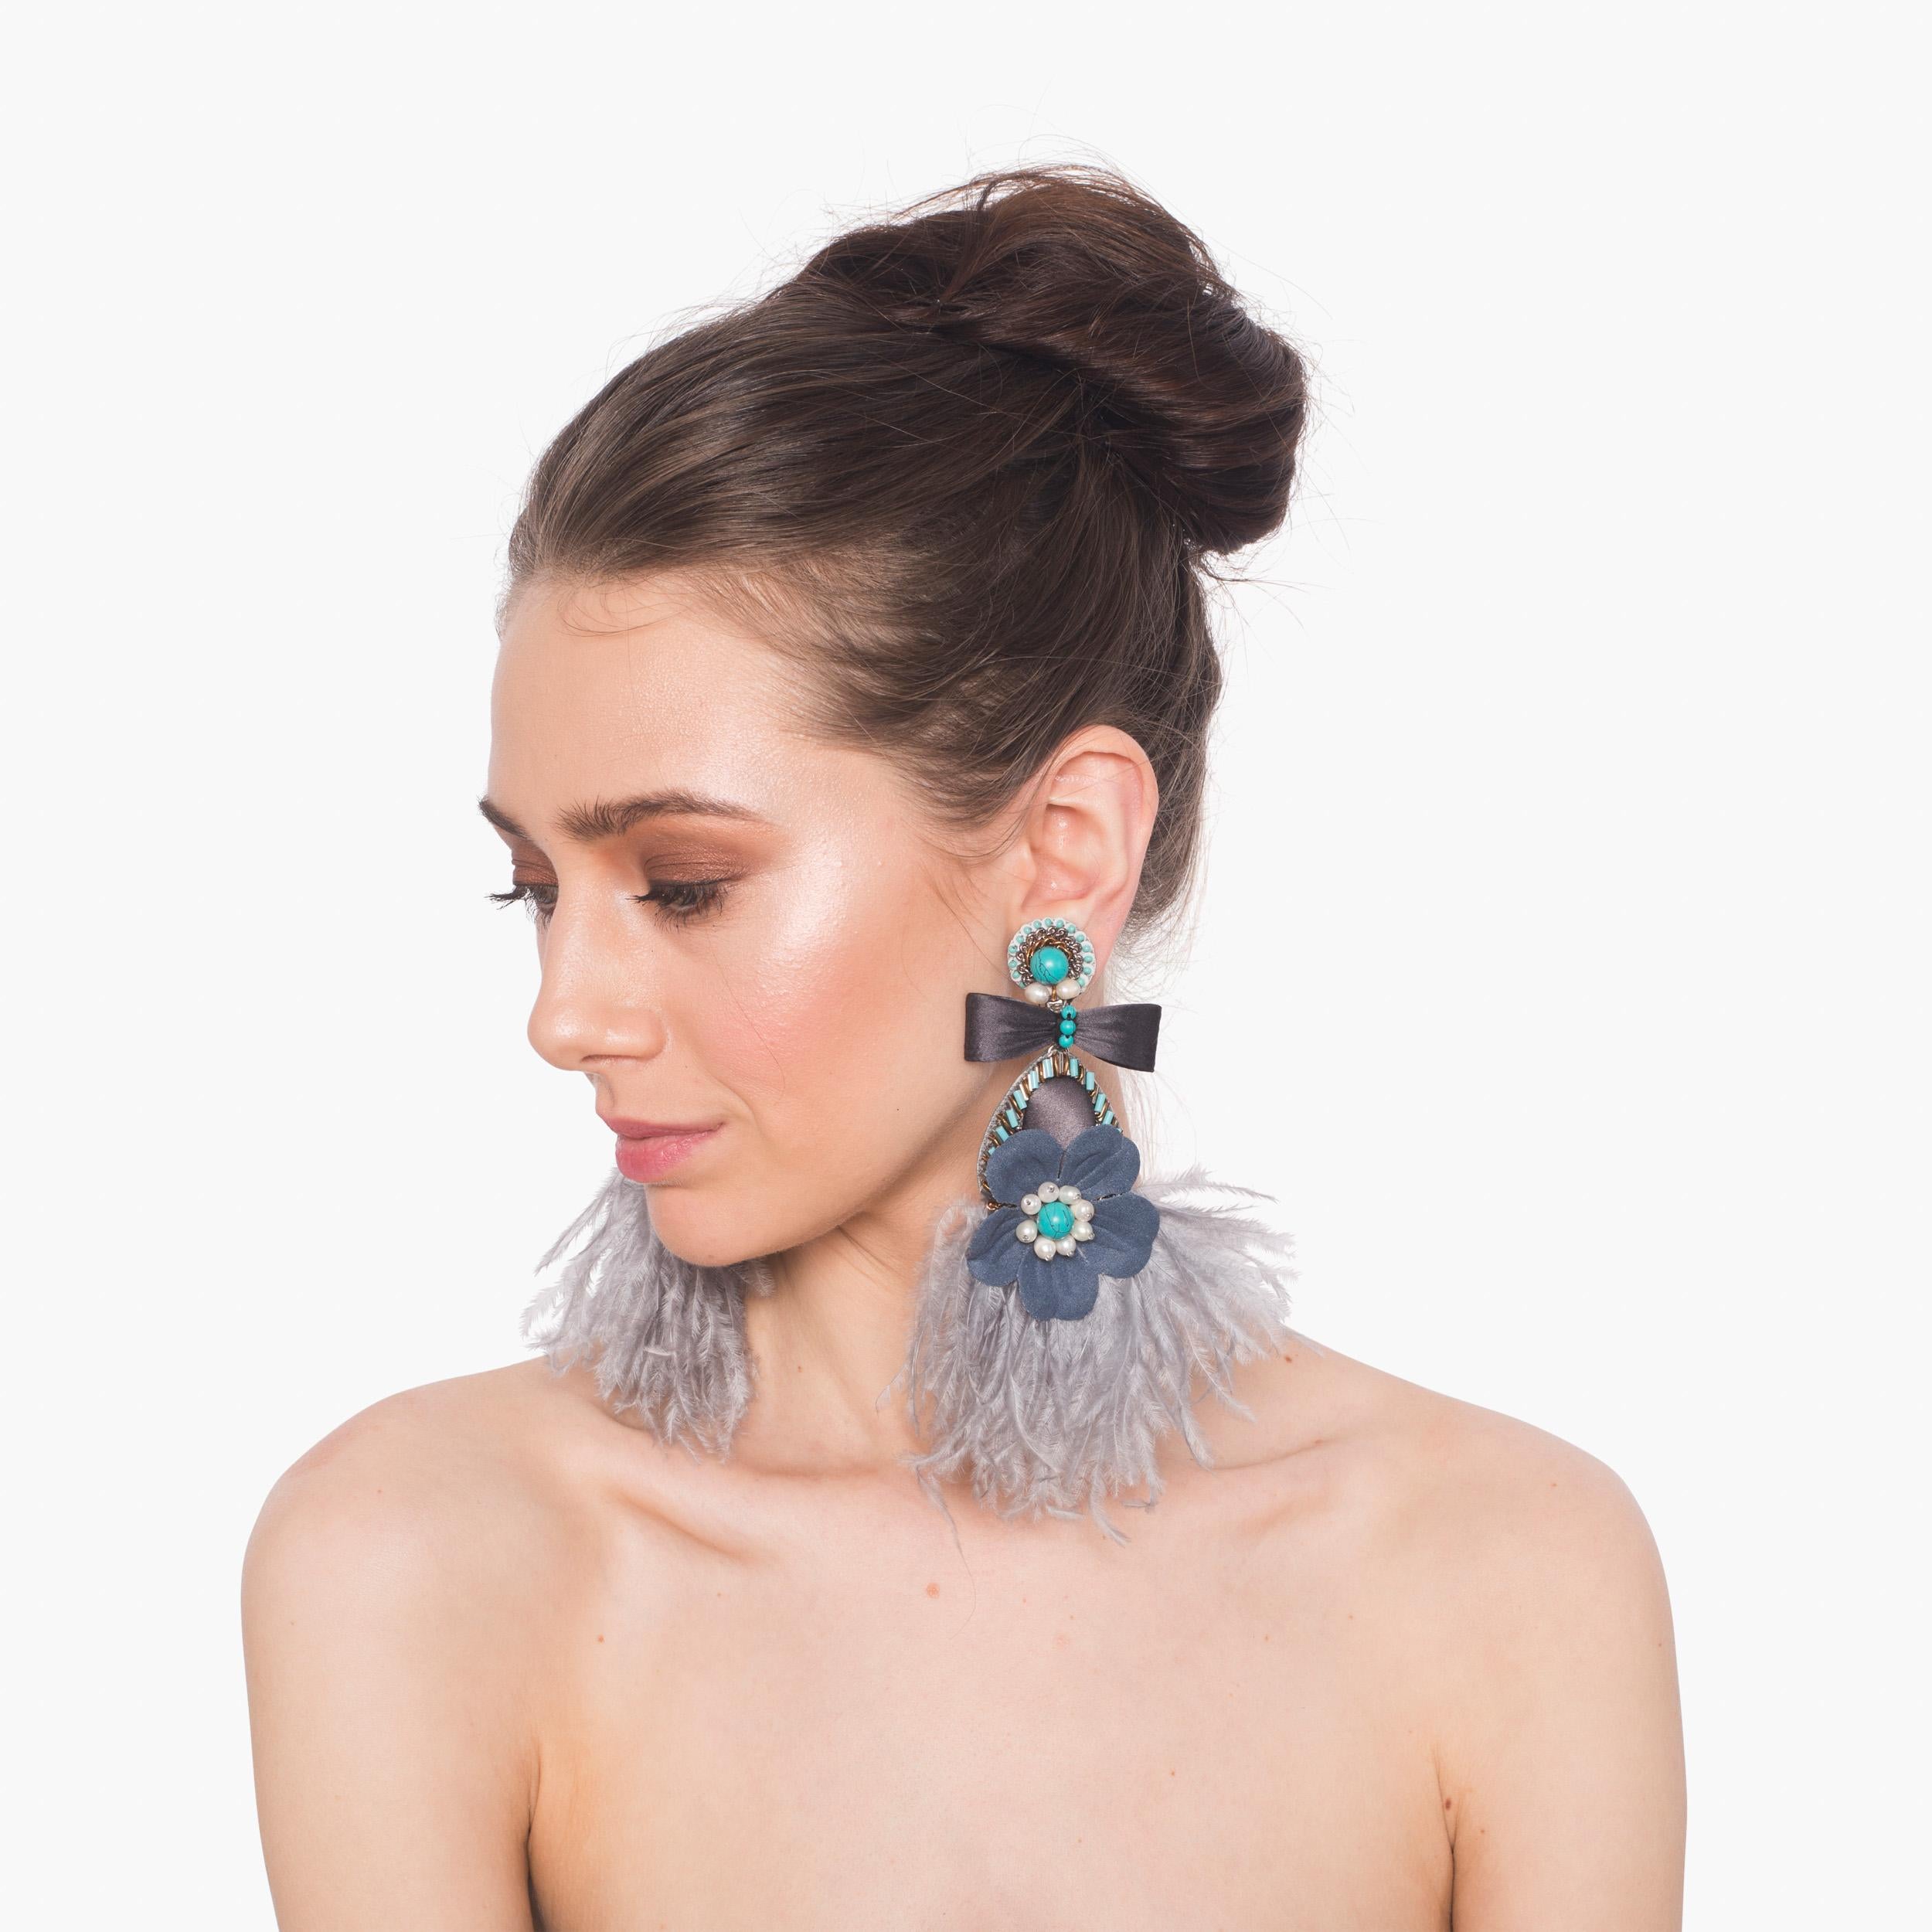 Femininity abounds in the Lago earring. Mother-of-pearl, fabric florals, and delicate ostrich feathers make Lago the perfect statement earring.